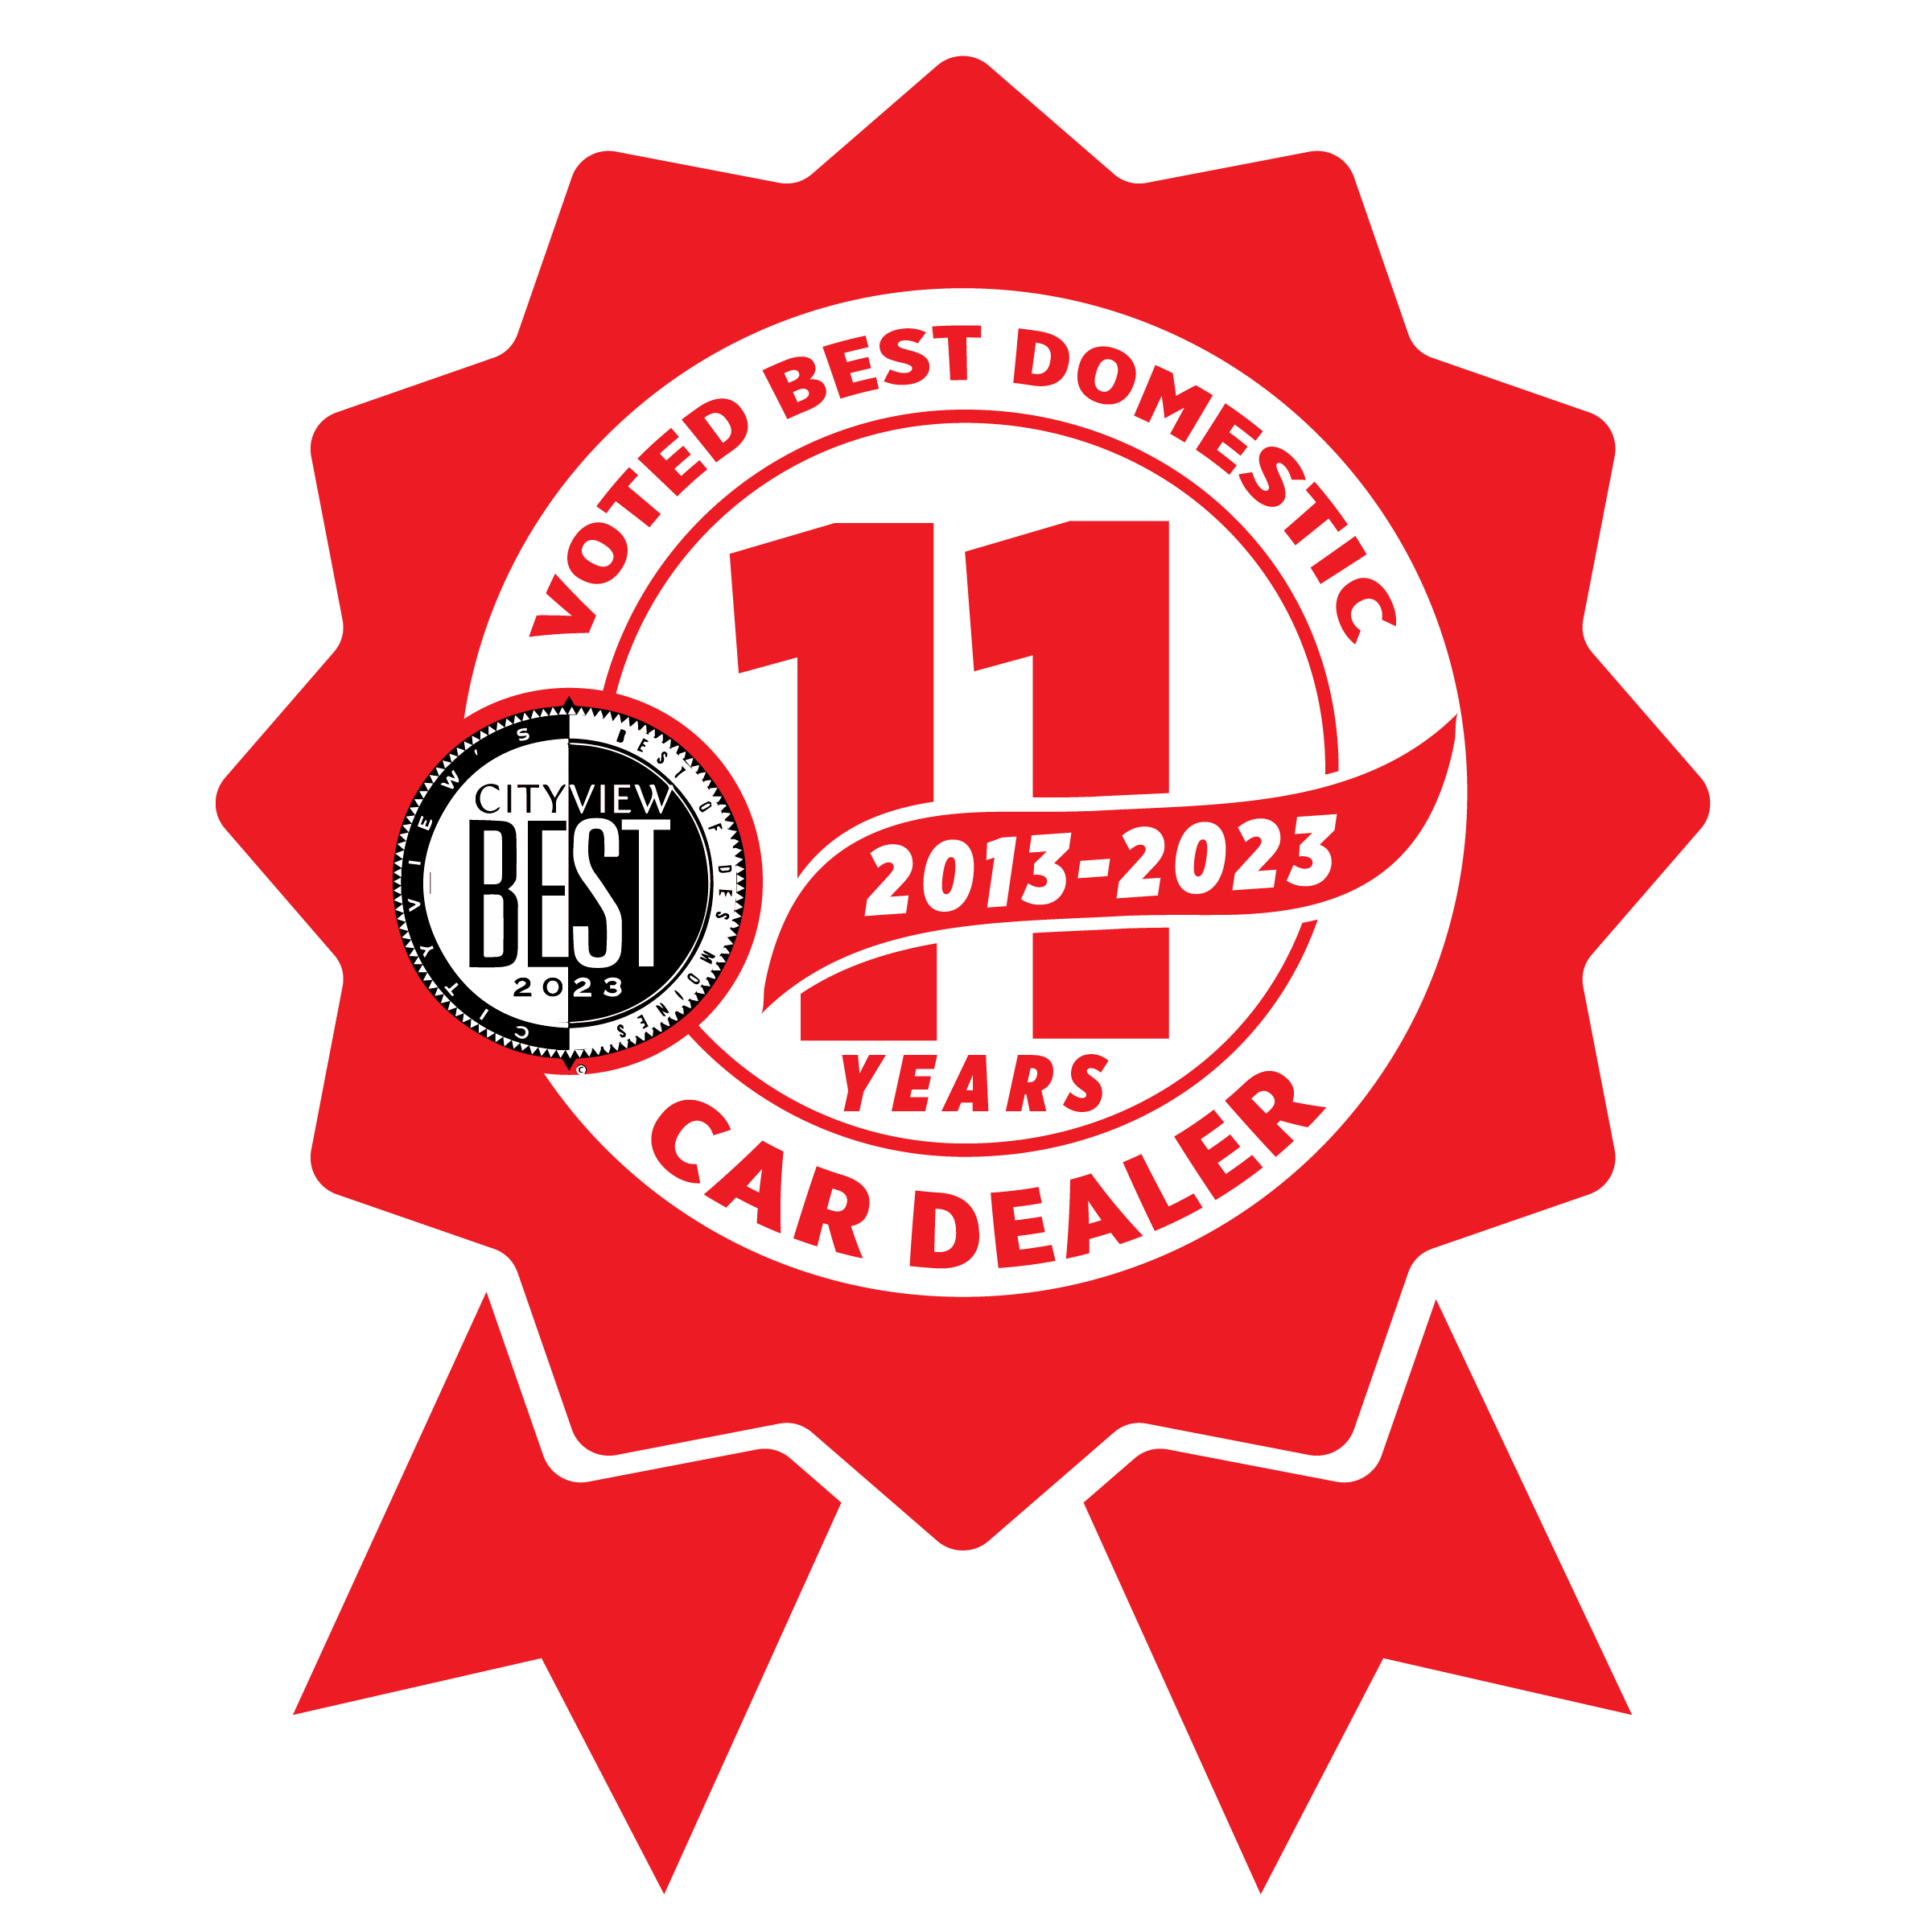 Stivers Ford Lincoln in Waukee IA - Best Domestic Car Dealer